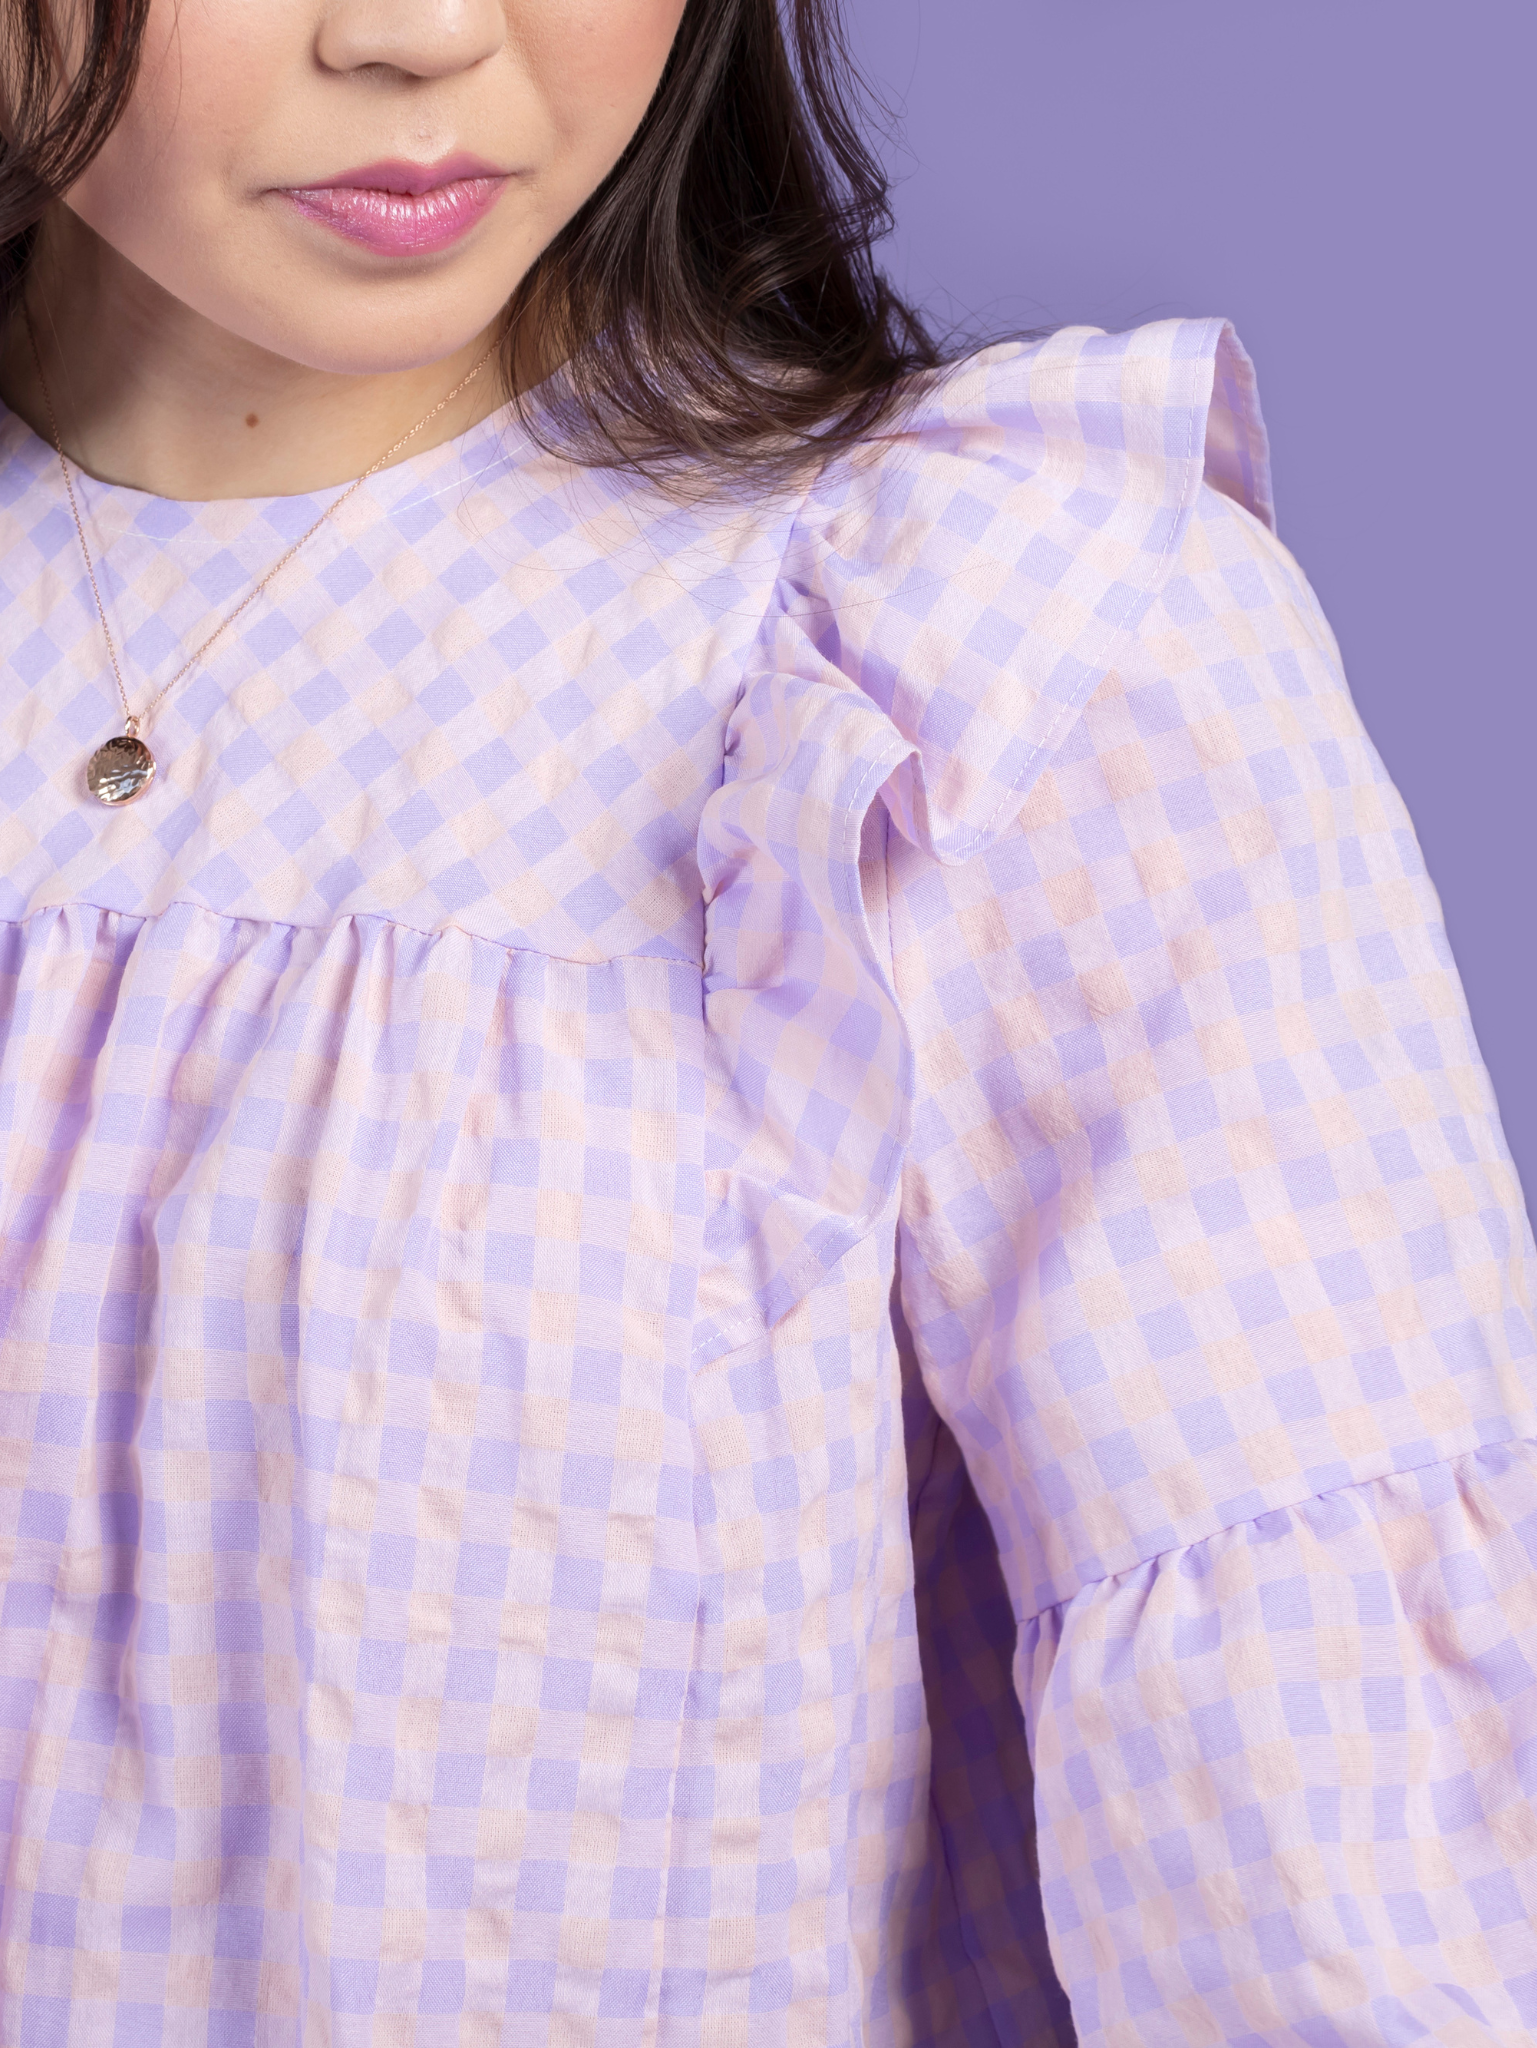 Sewing Kit - Marnie Blouse and Mini Dress in Ditsy Cottage Cotton Lawn